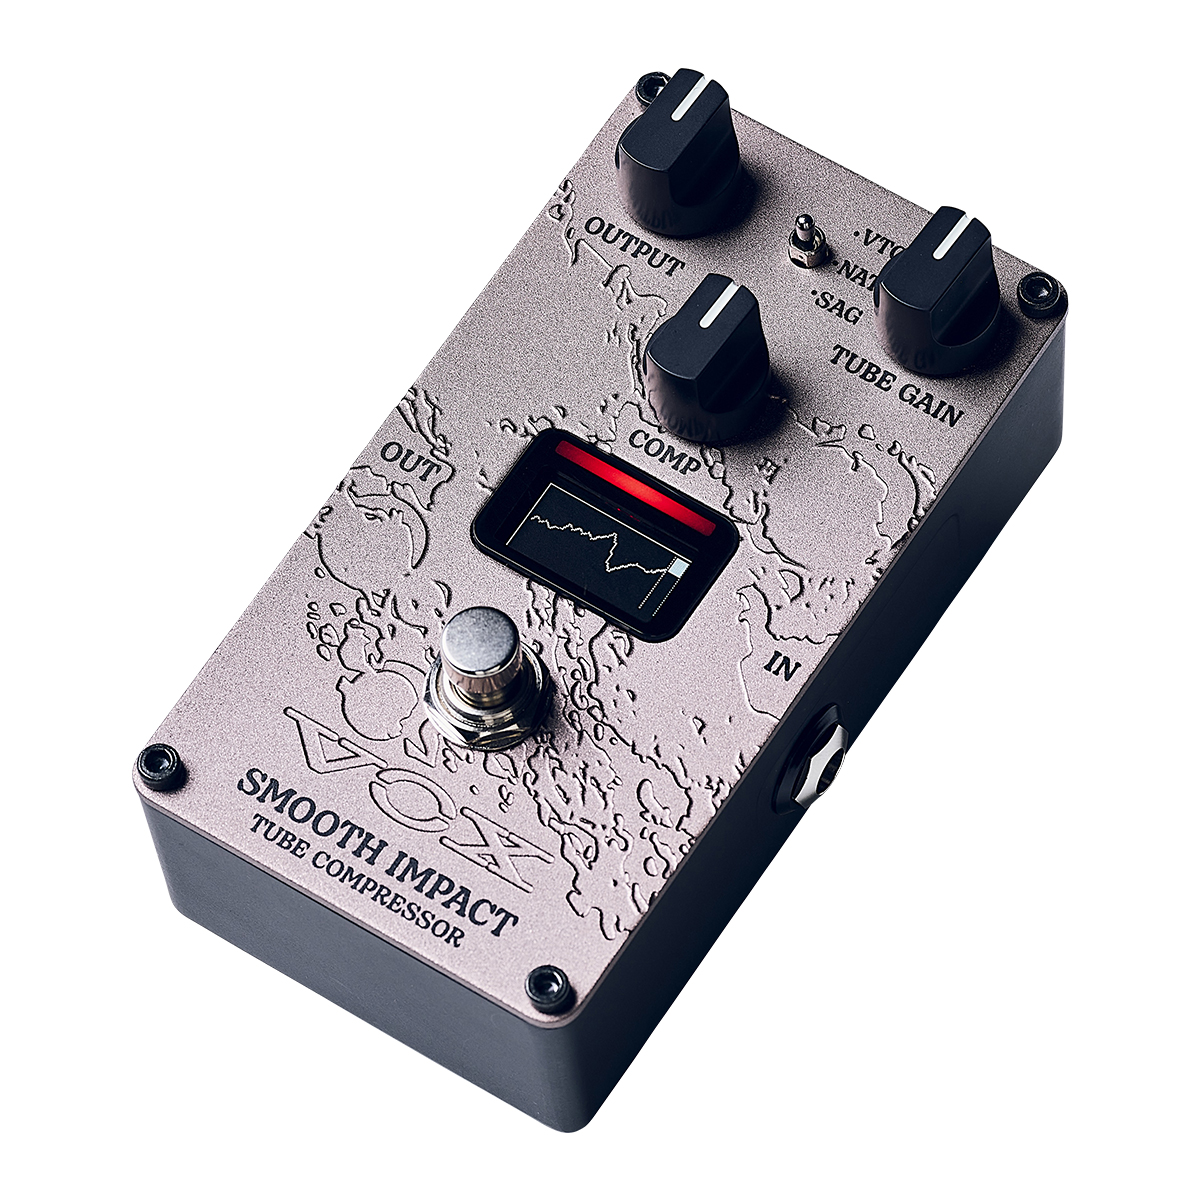 Vox Valvenergy Smooth Impact Tube Compressor Guitar Effects pedal top angled